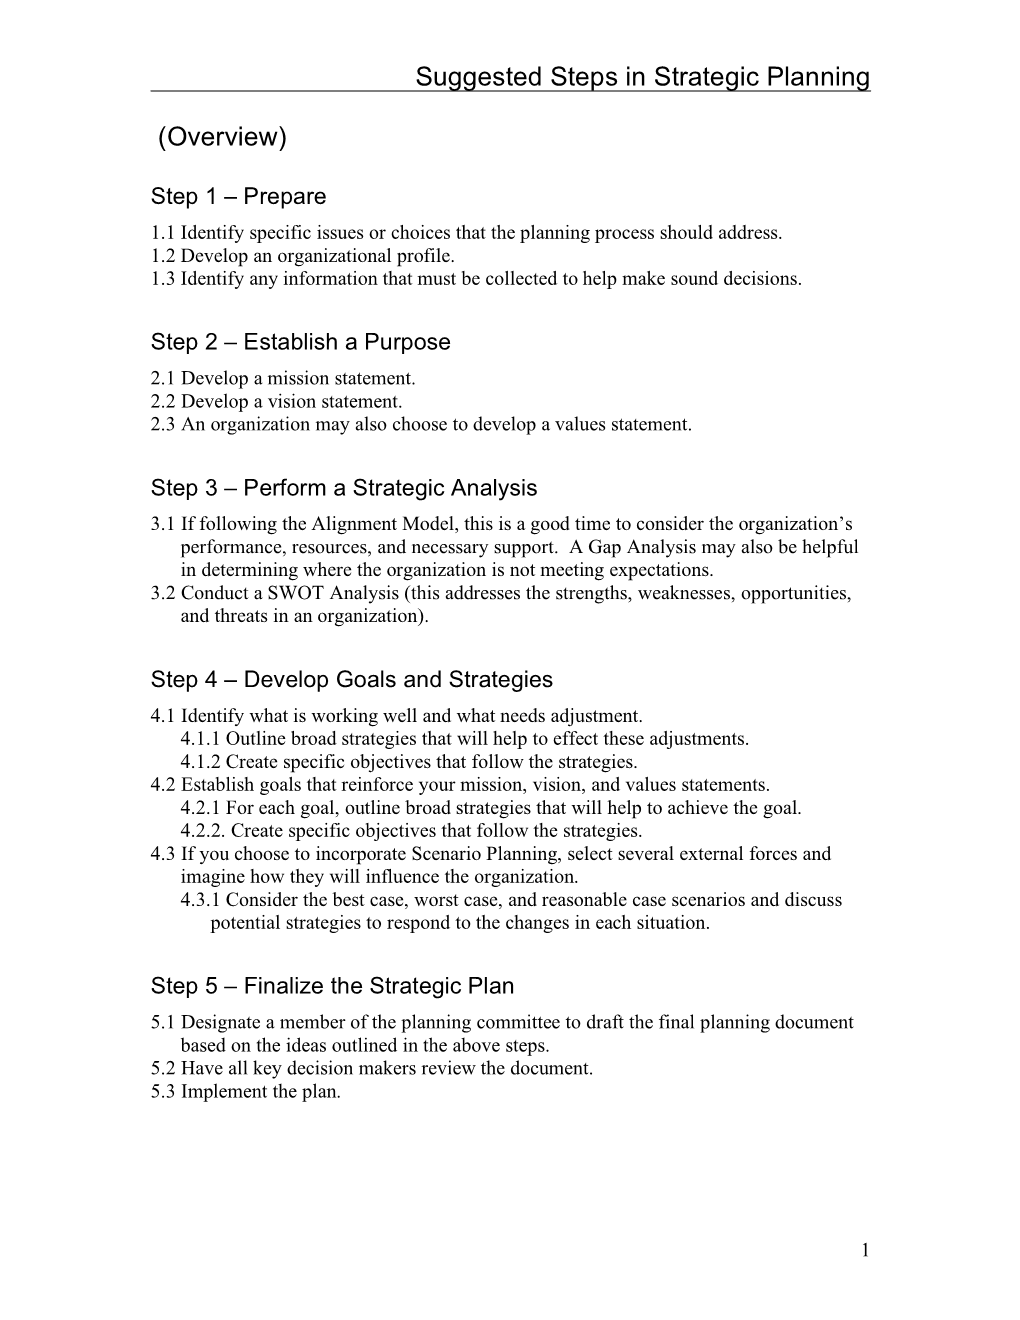 Suggested Steps in Strategic Planning (Overview)